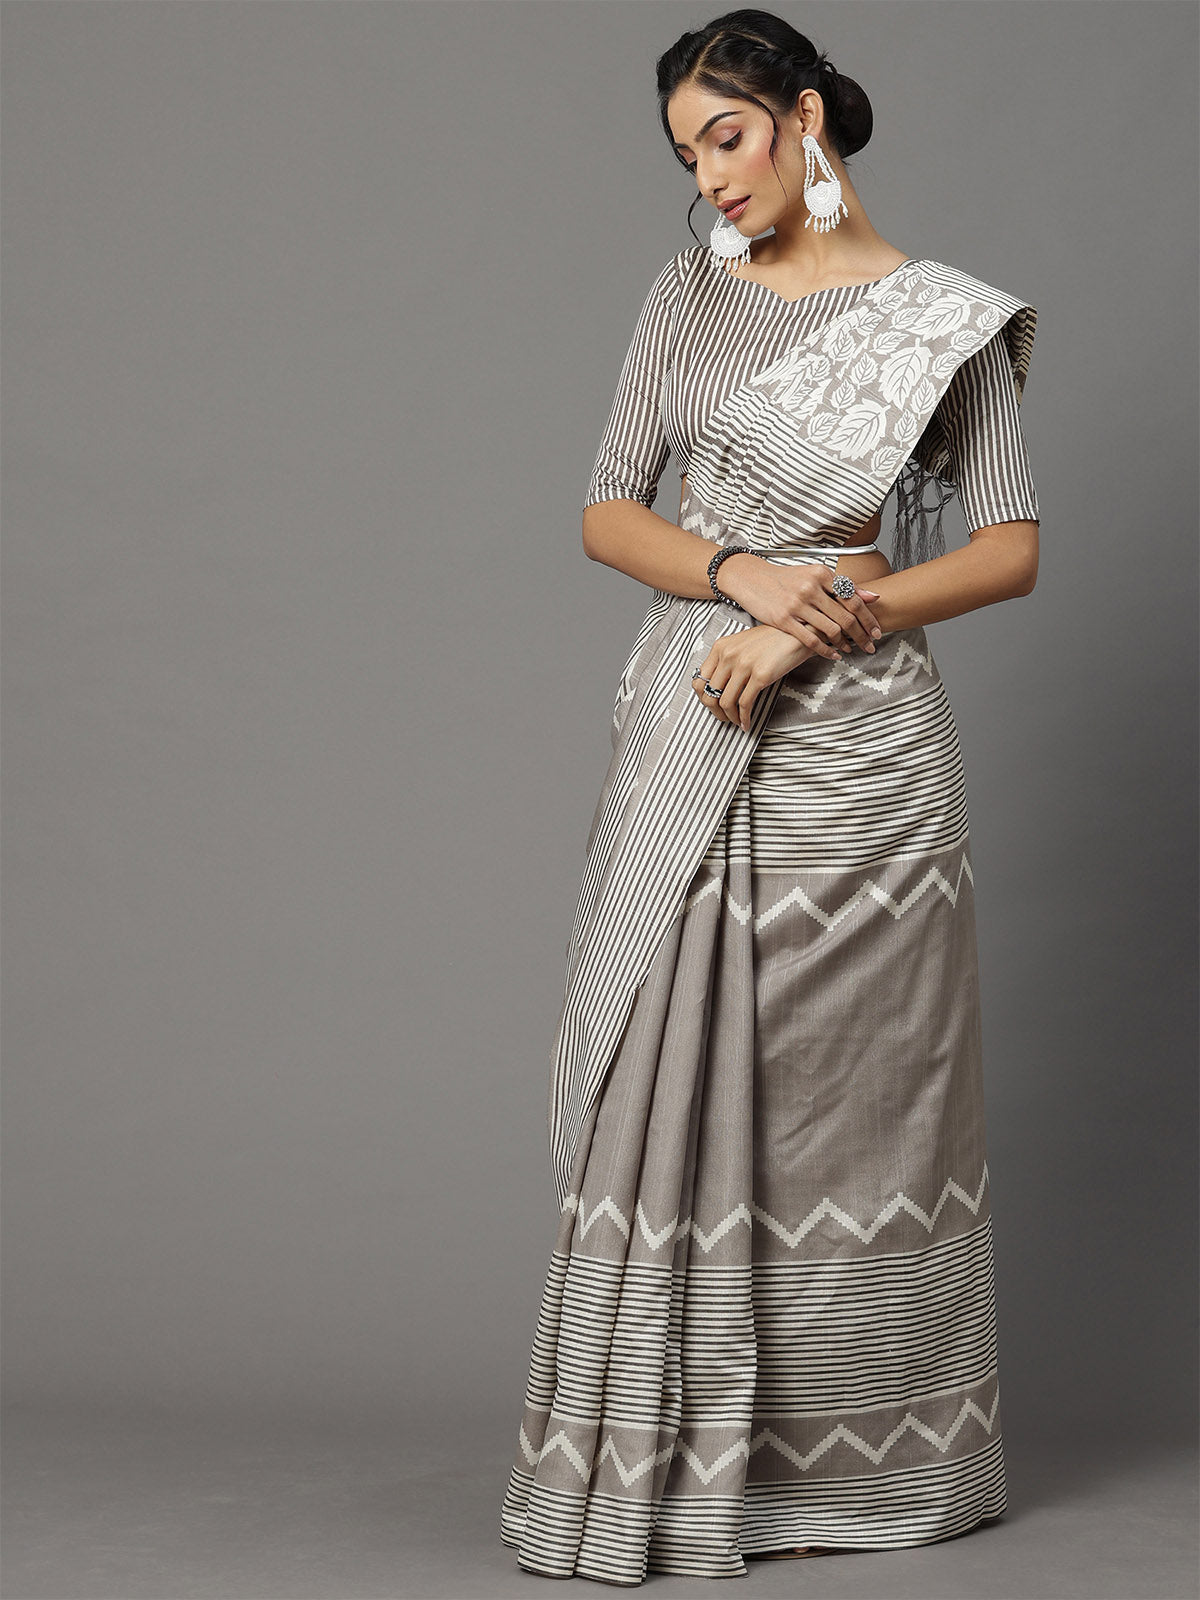 Grey Printed Blend Silk Saree With Unstitched Blouse